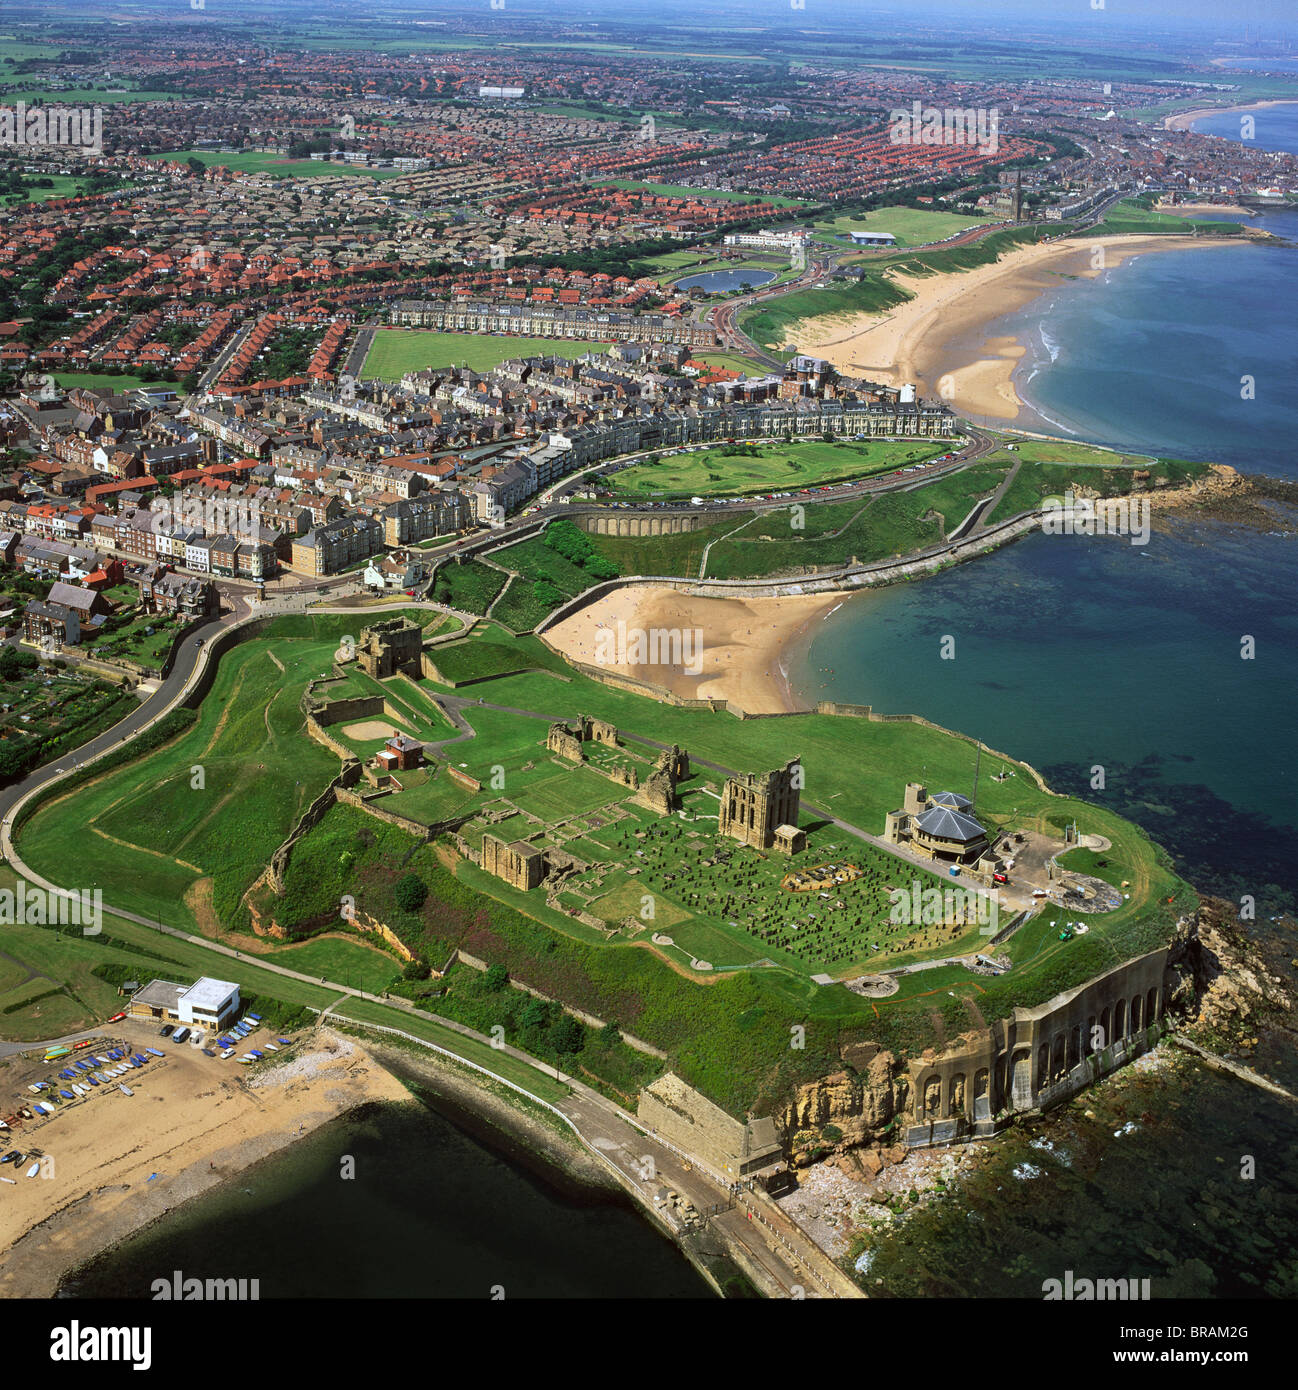 Aerial image of Tynemouth Priory and Castle, on a rocky headland known as Pen Bal Crag, Tyne and Wear, England, United Kingdom Stock Photo